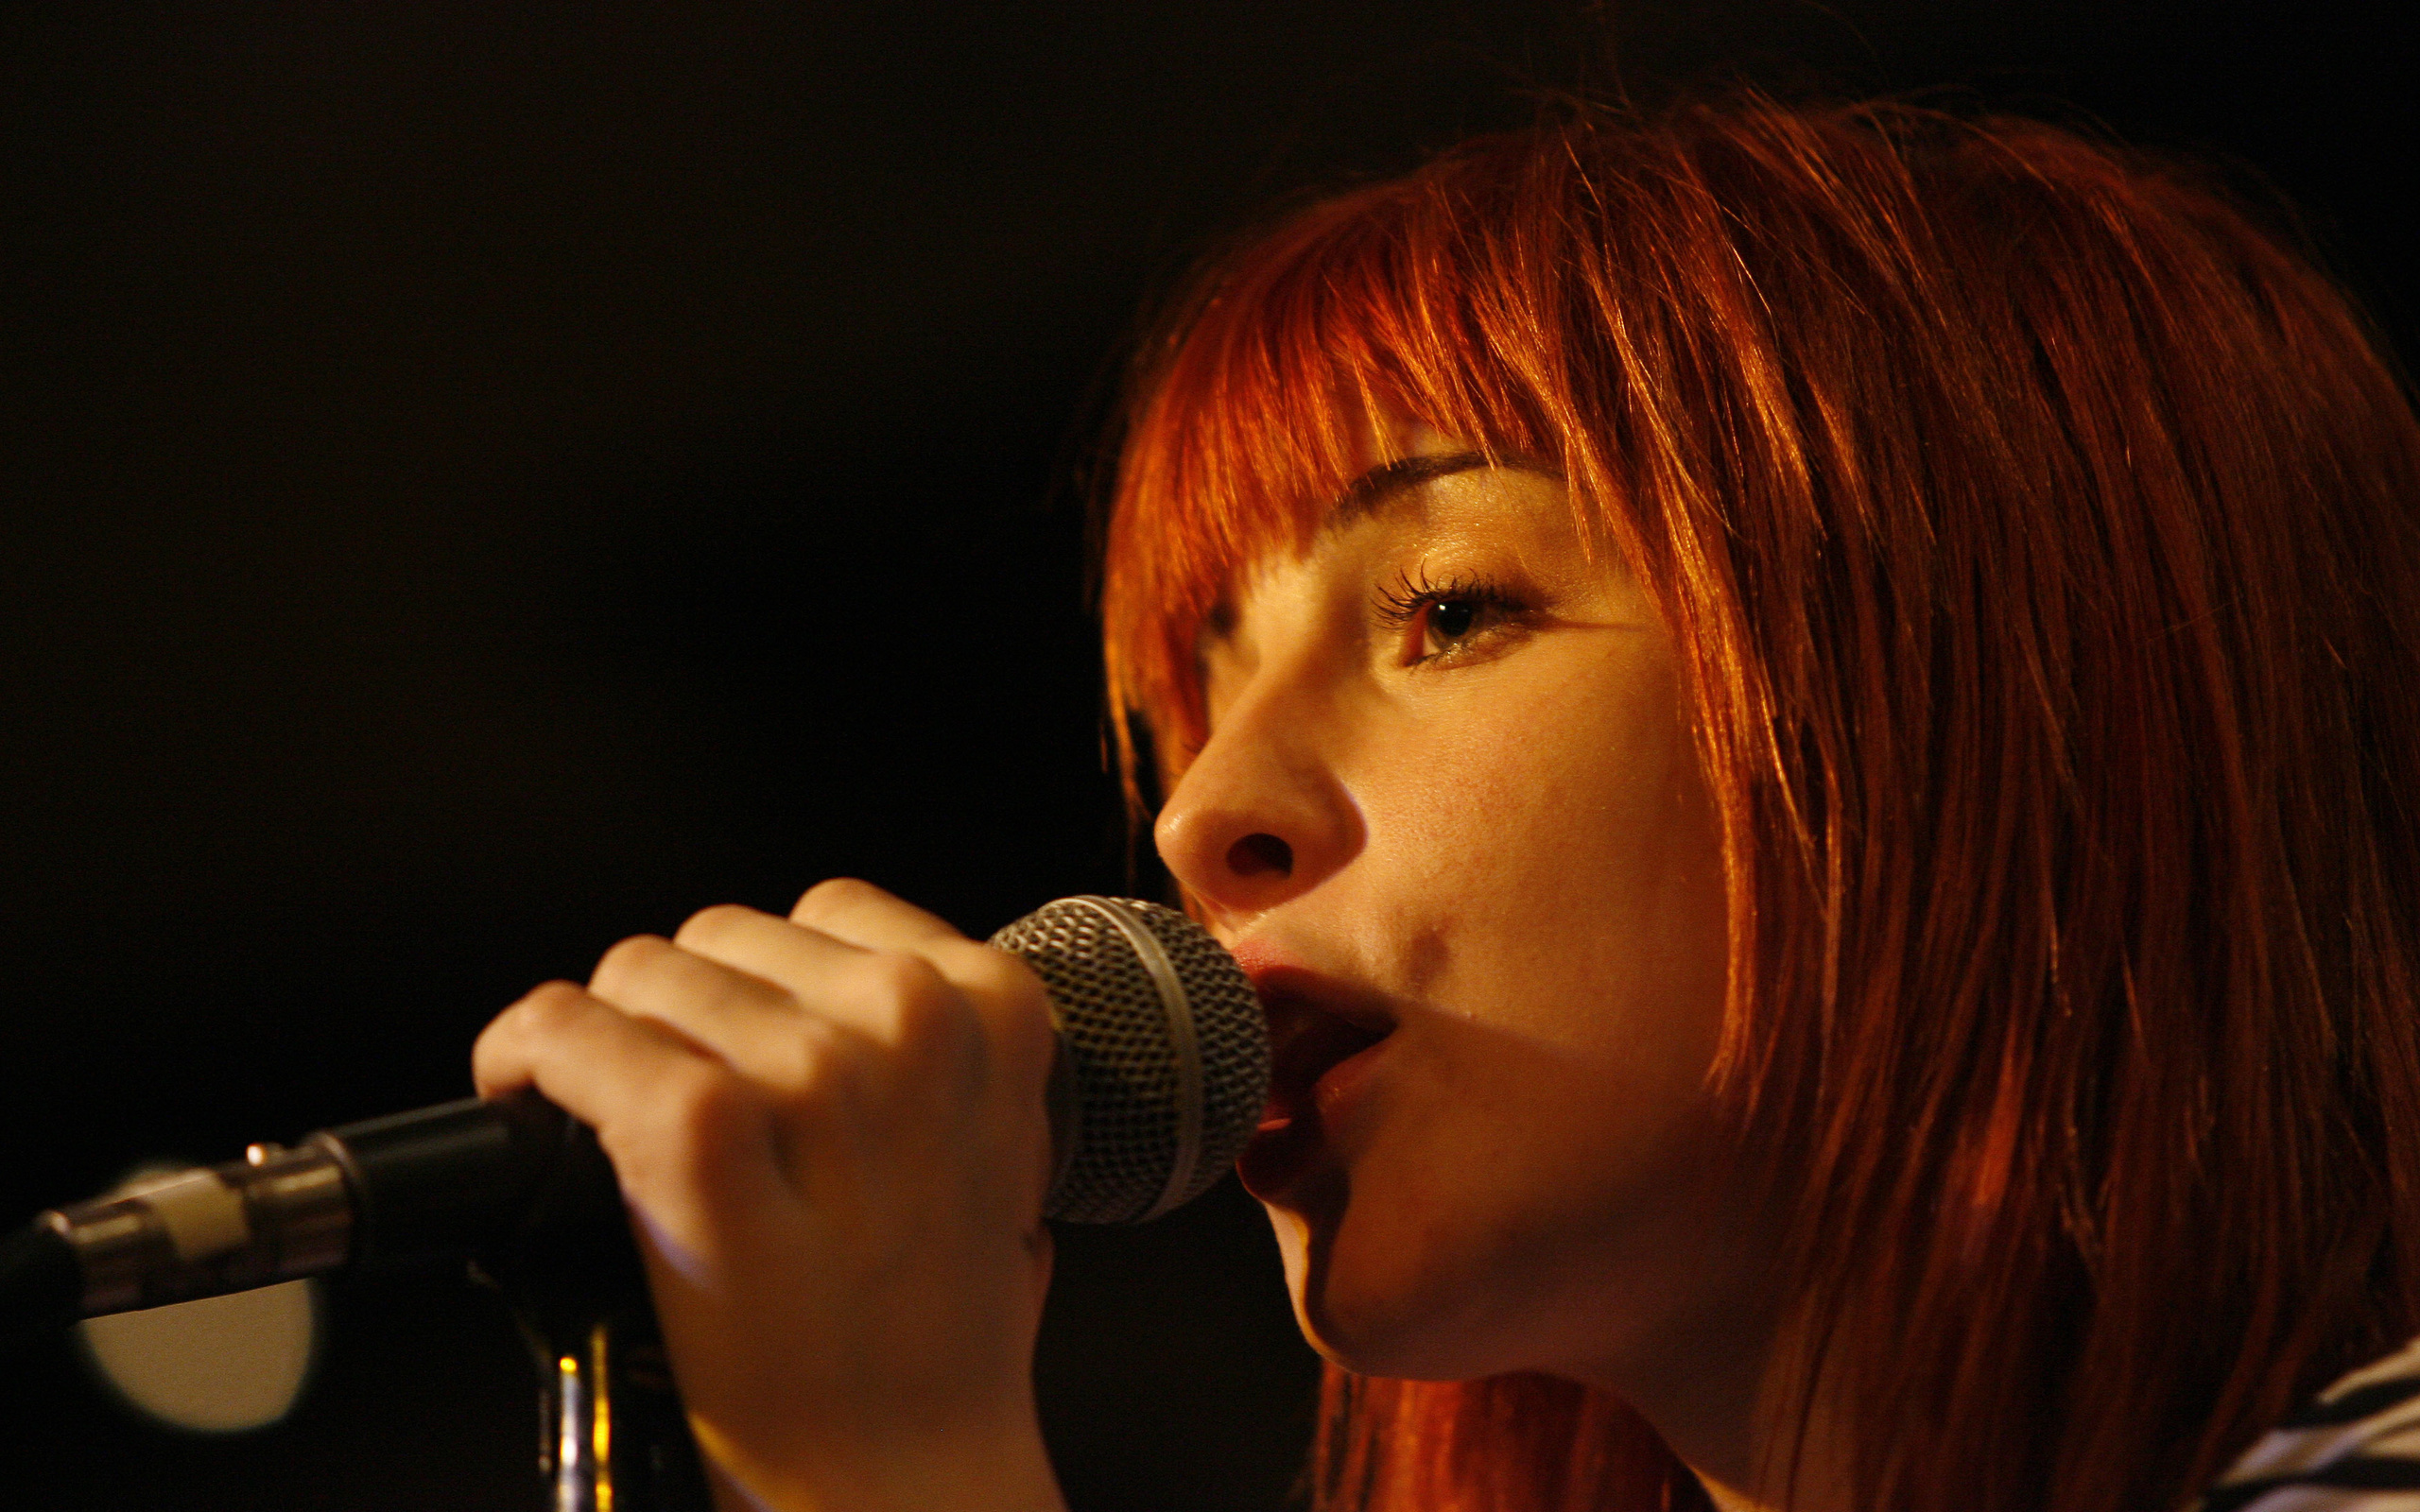 Music Hayley Williams HD Wallpaper | Background Image